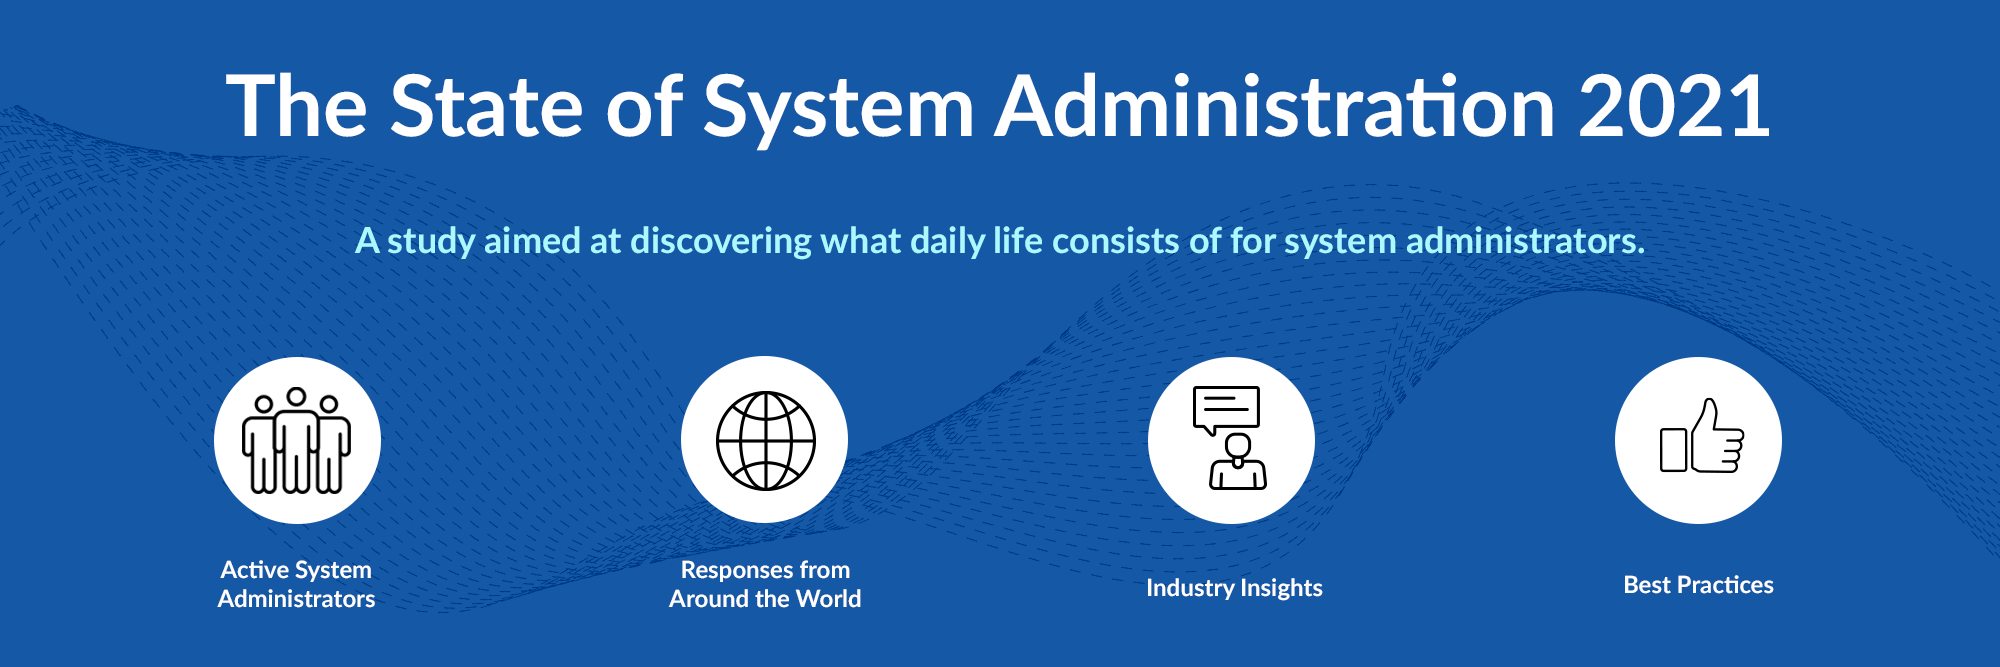 The State of System Administration 2021. A study aimed at discovering what daily life consists of for system administrators.